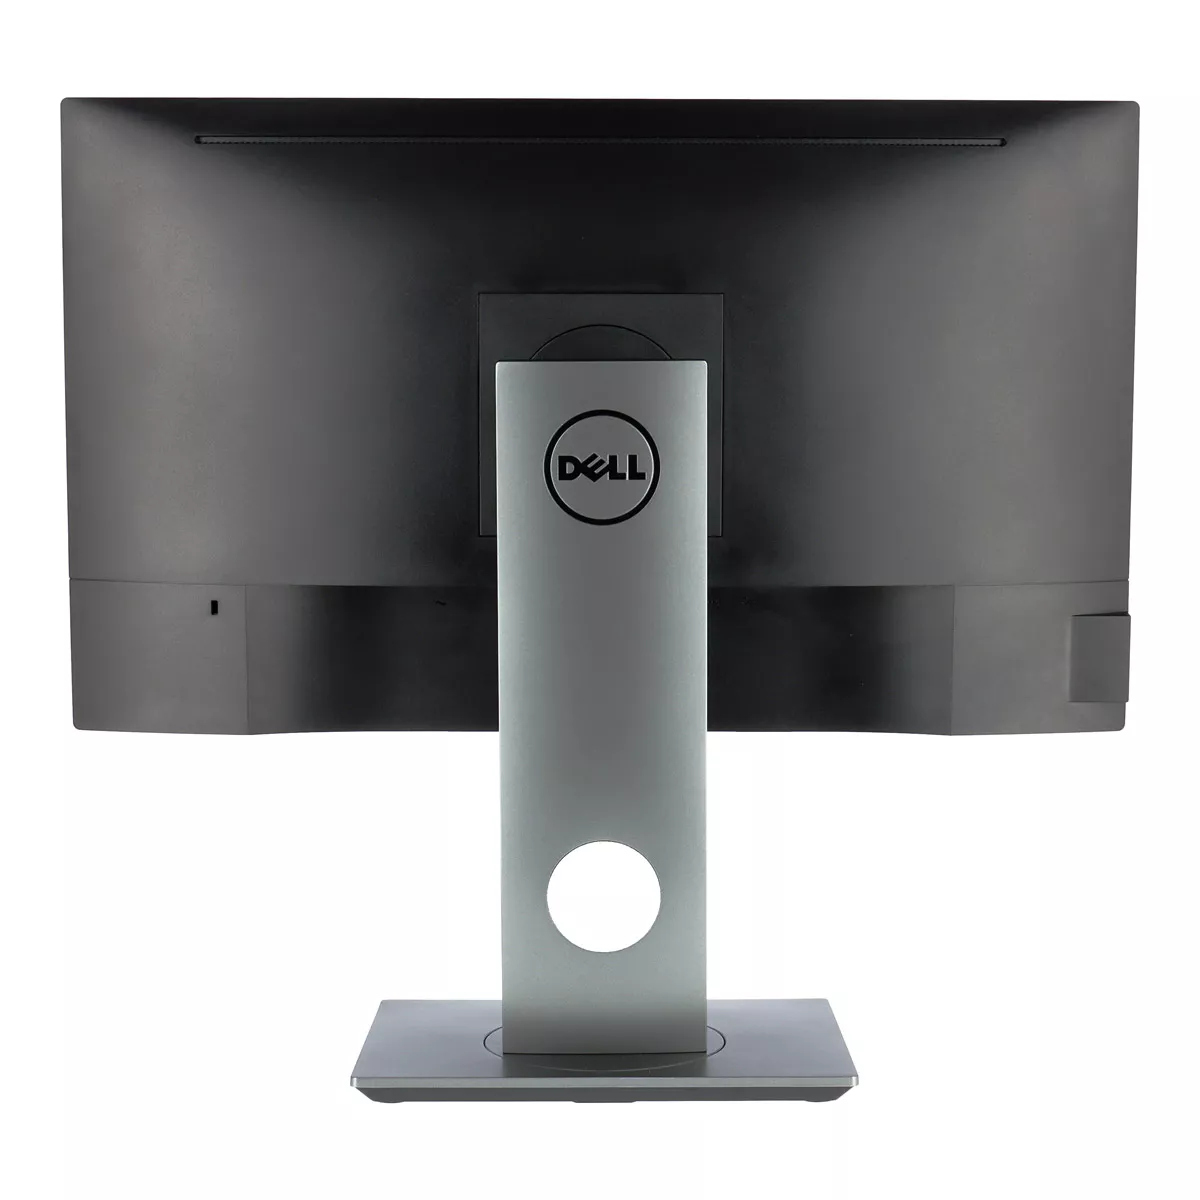 Dell P2417h 24 Zoll 1920x1080 LED Schwarz A+